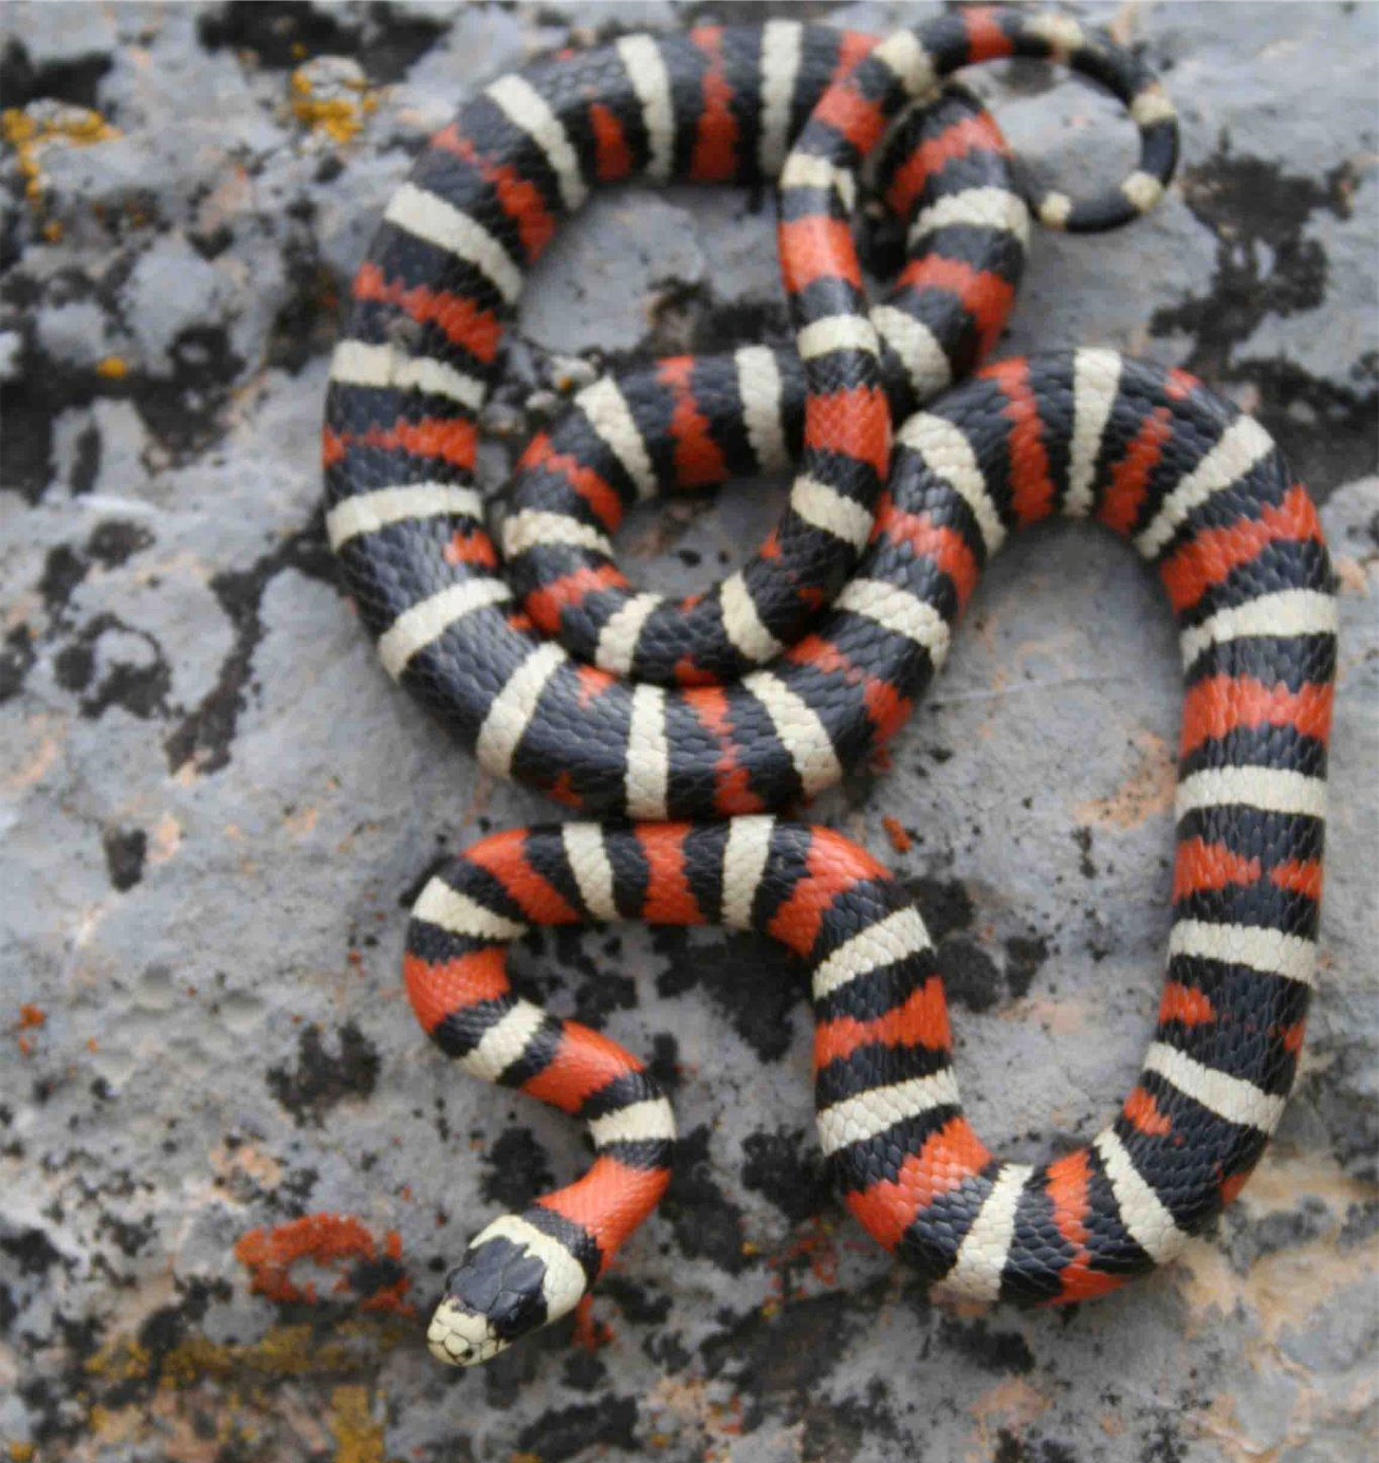 A black red and white snake